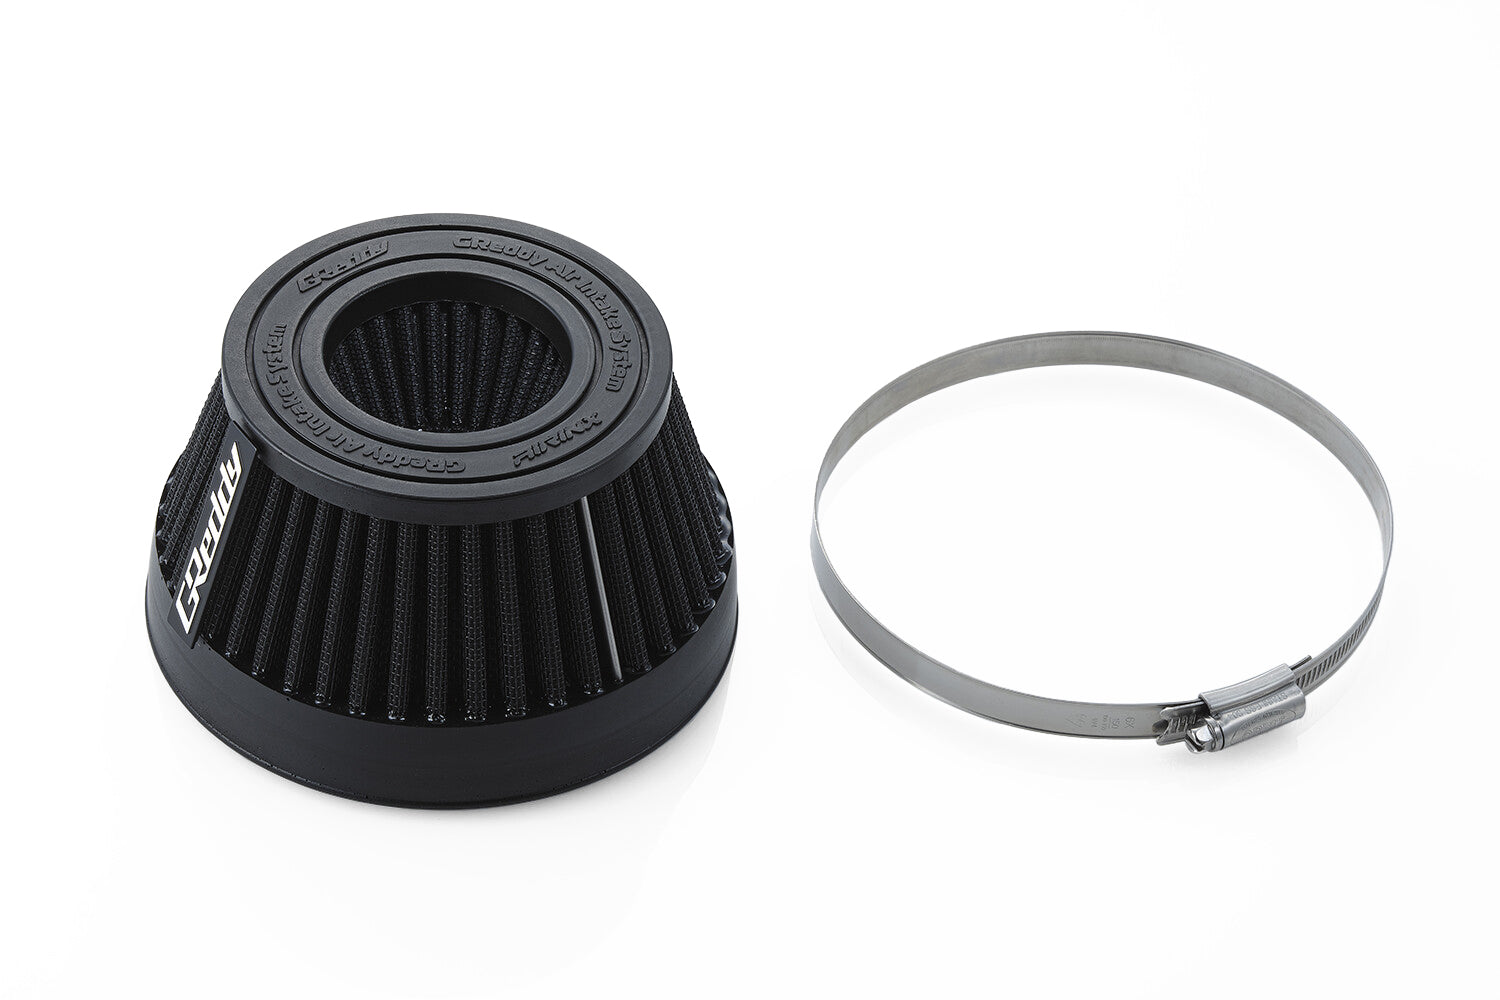 ShopGreddy Spl.: GReddy A/F-Type Airinx S Air Filter, Baseplate & Adapters (requires 136 base plate and adapter - each sold separately)